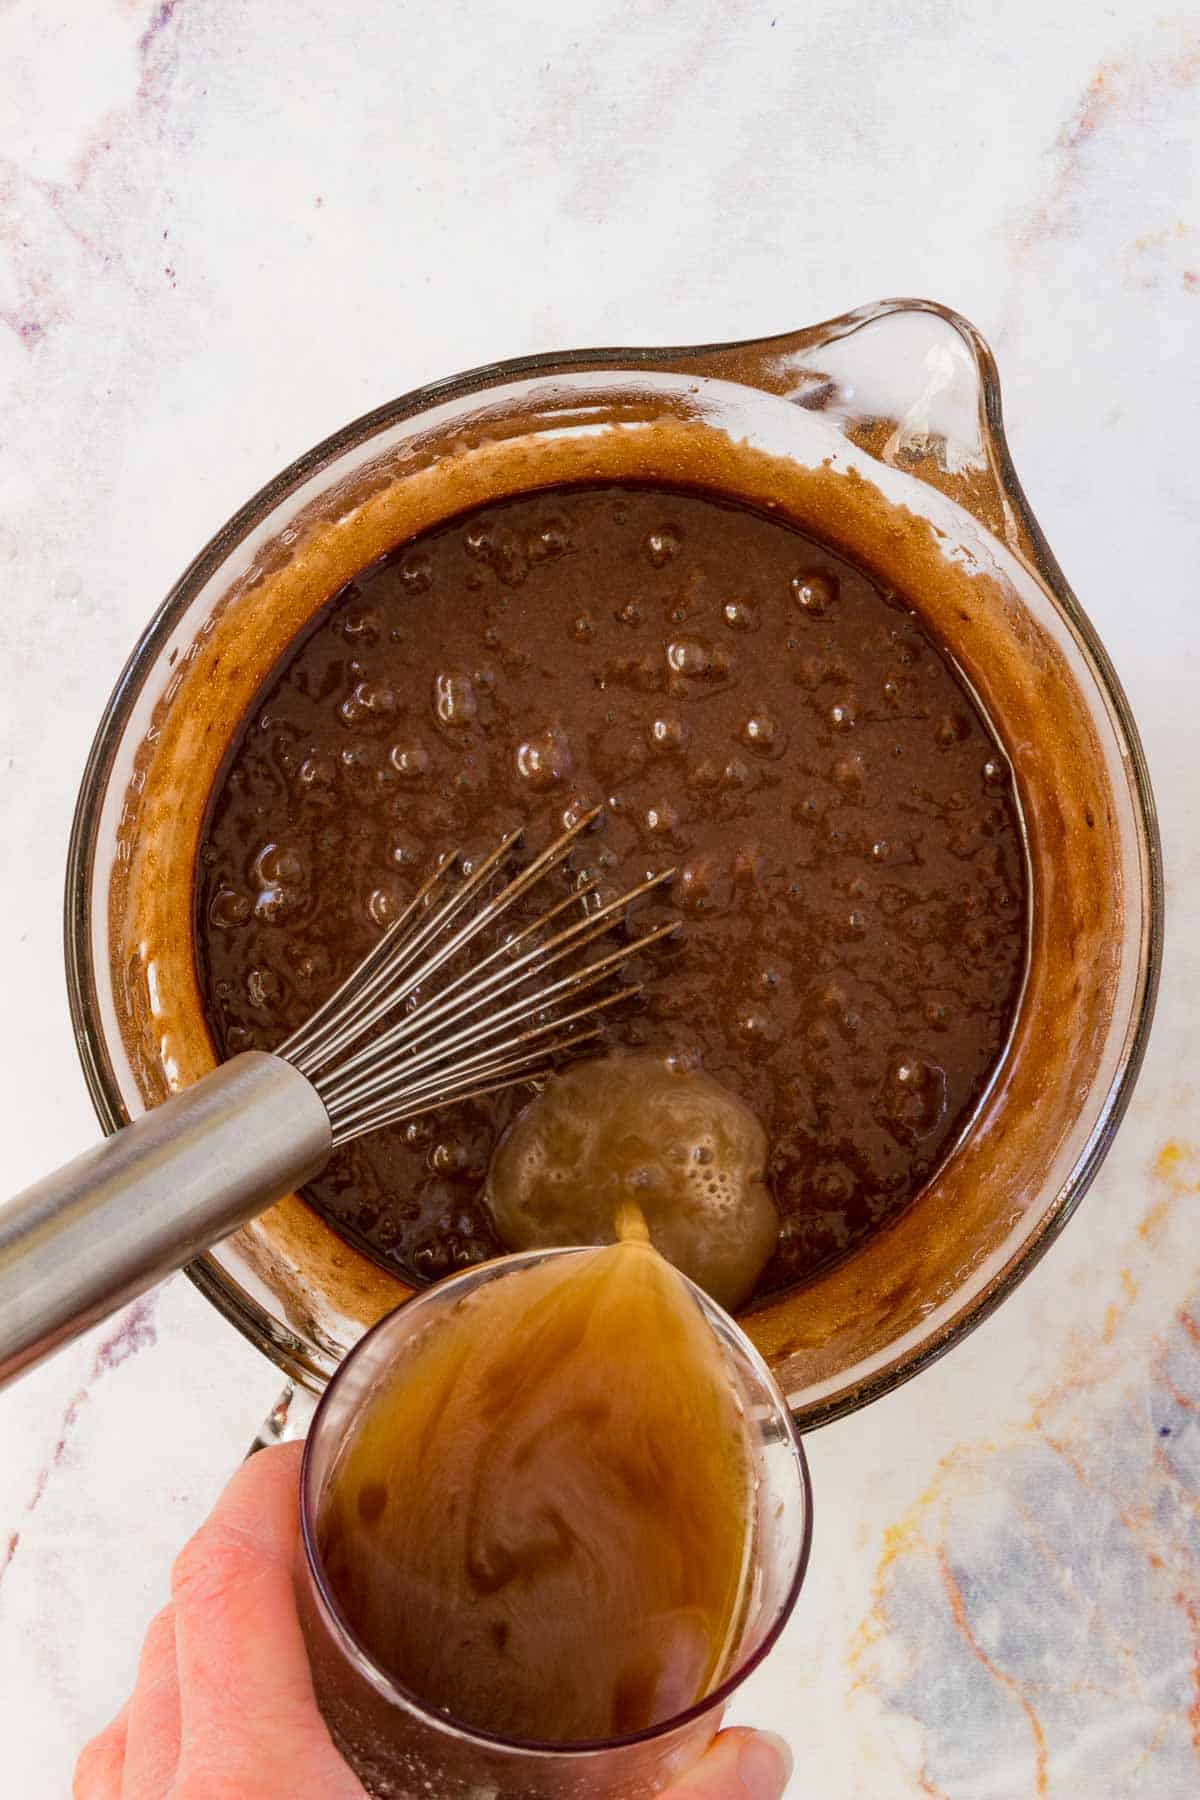 Instant coffee and is added into the chocolate cake batter.